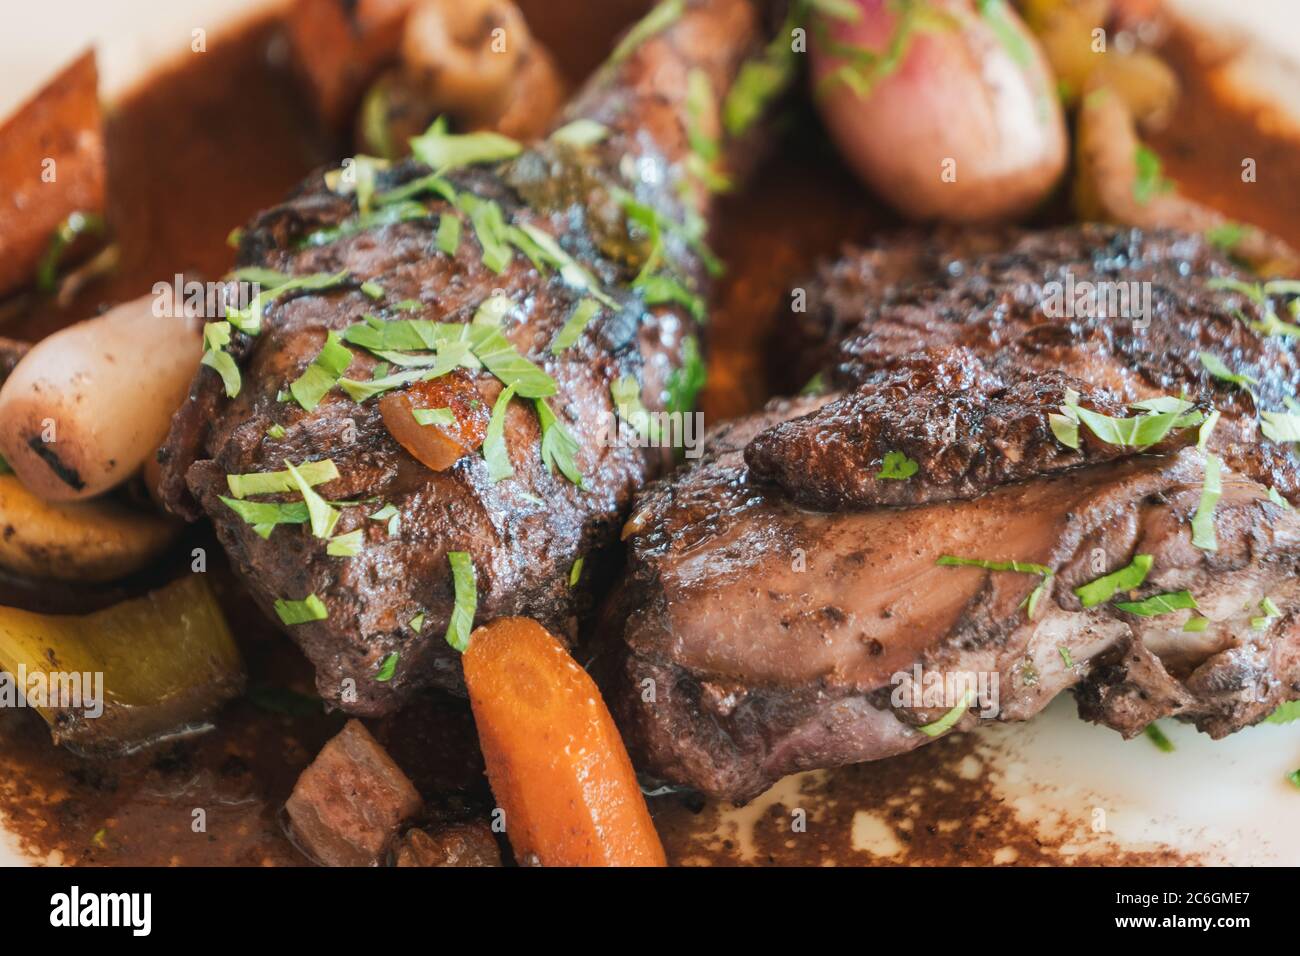 Coq au Vin, French Chicken Braised in Red Wine, on a White Plate Stock Photo